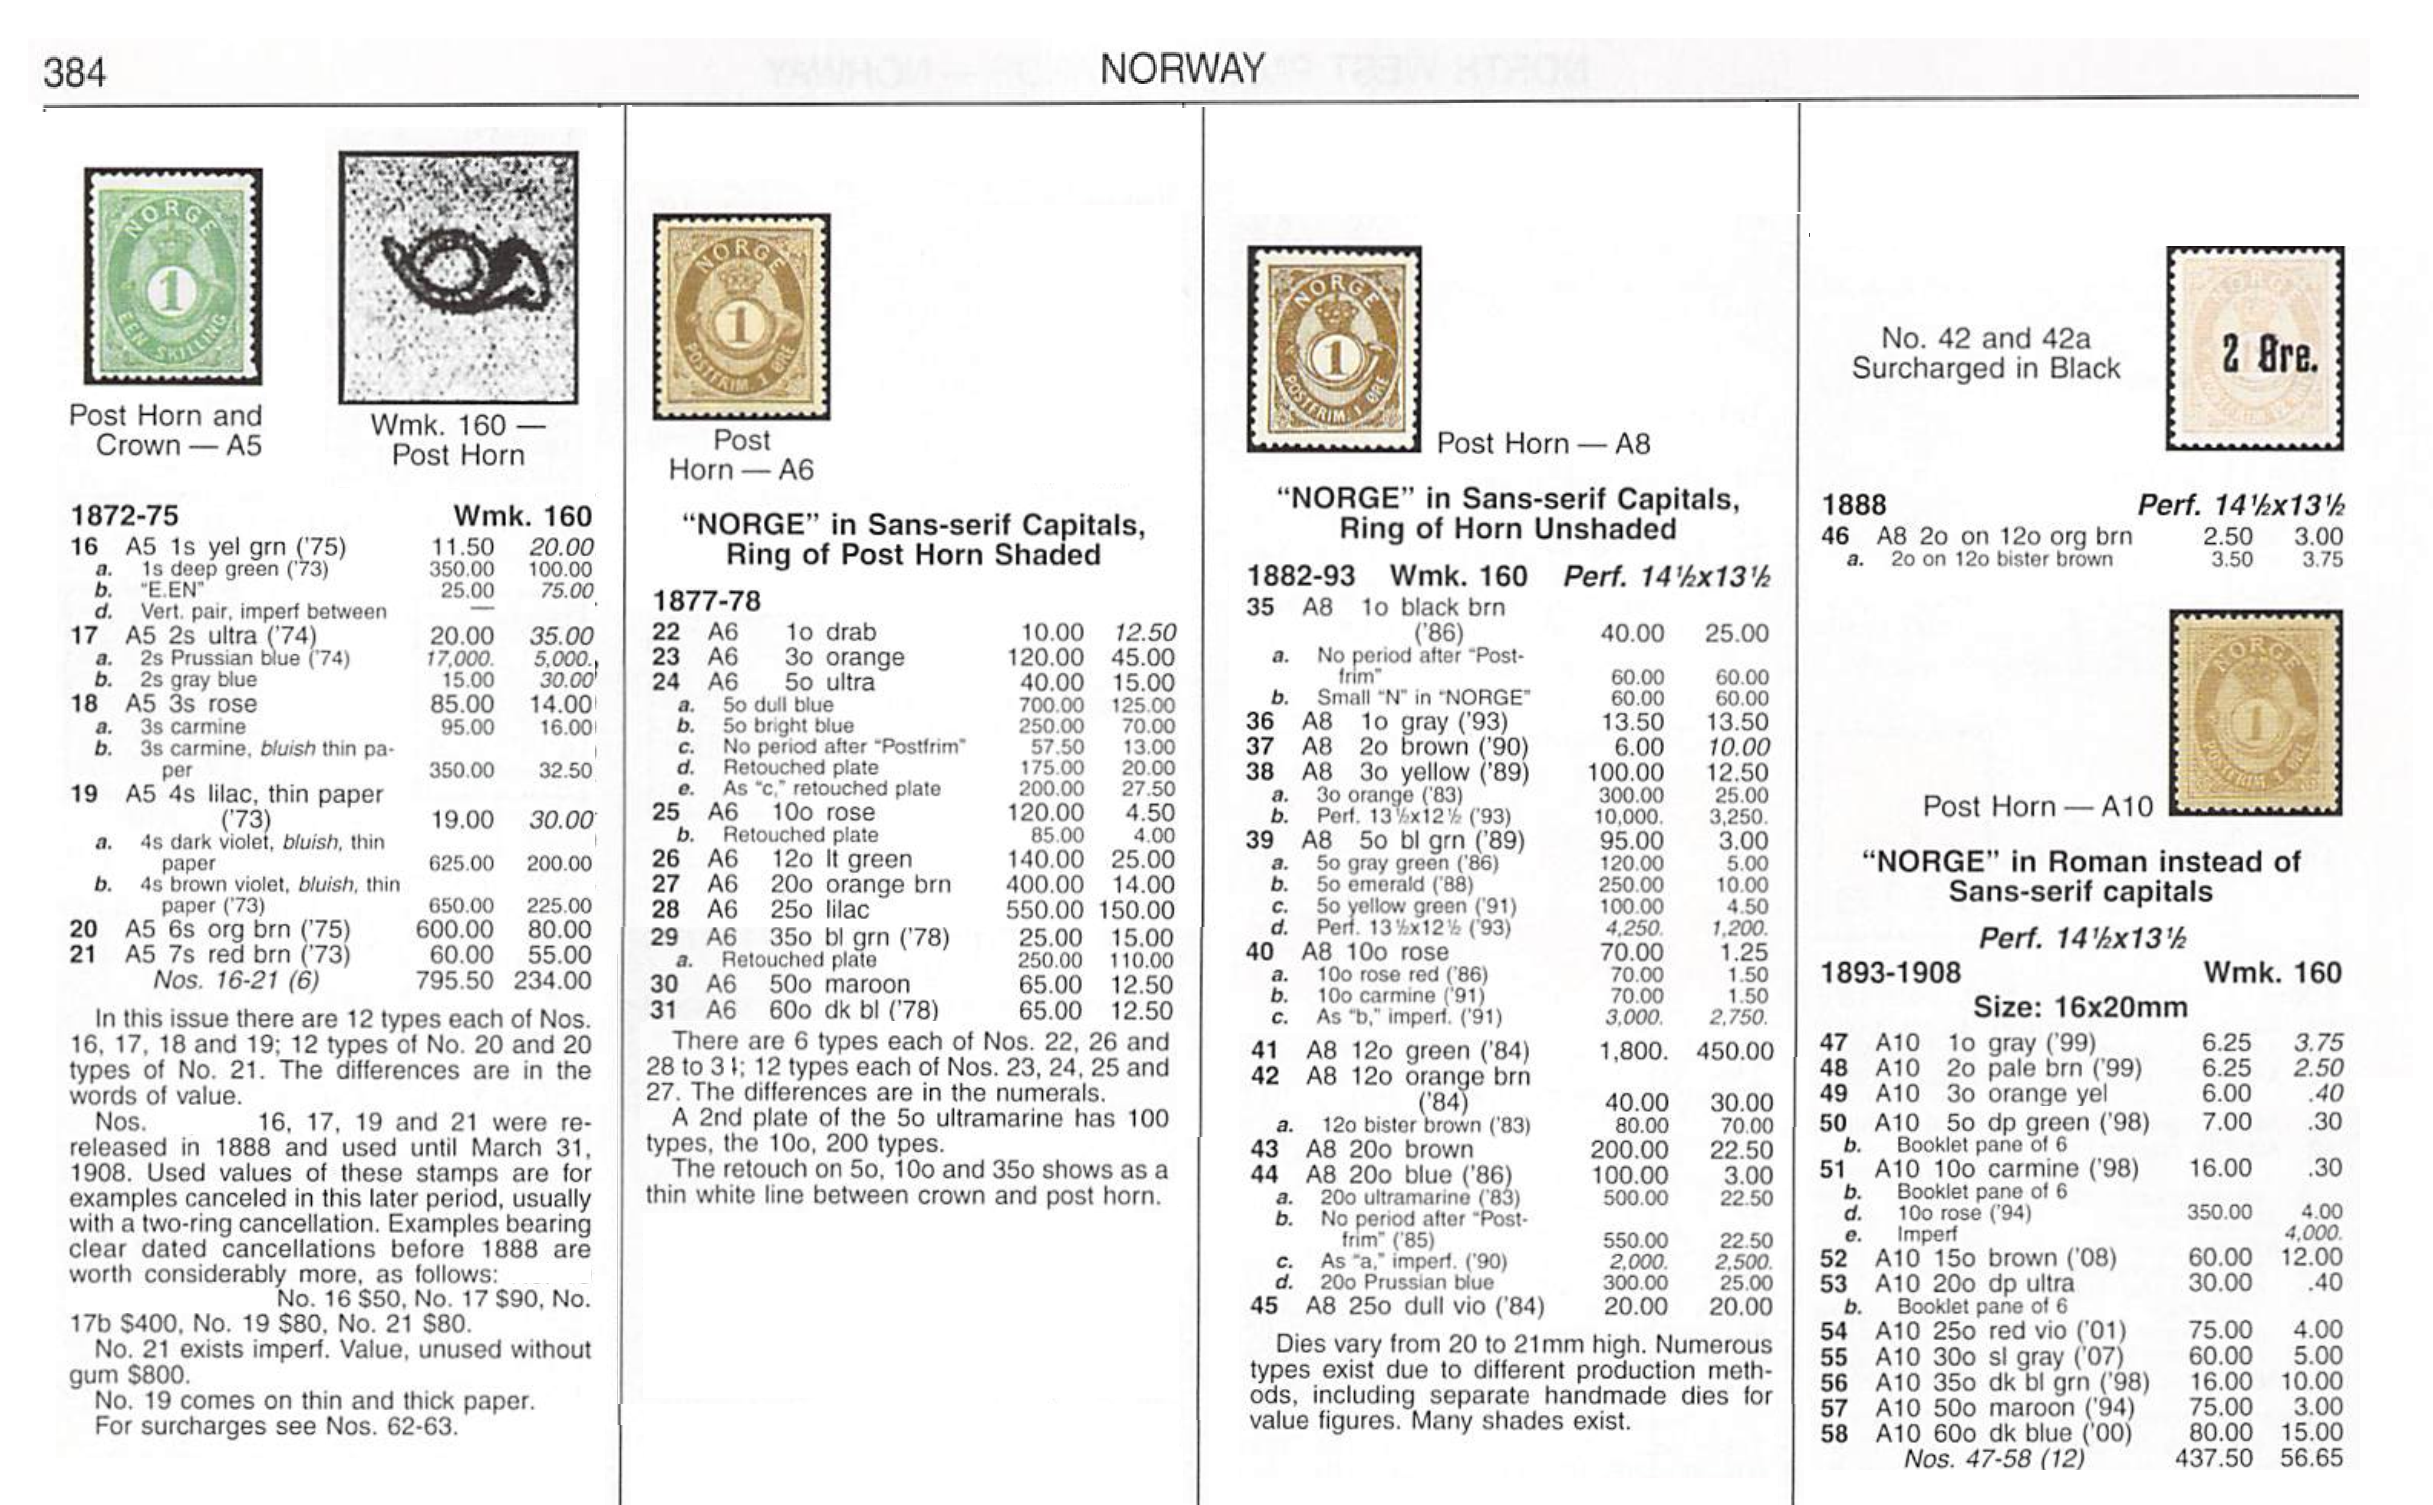 Scott catalogue listings for the first 26 years of Norway's Post Horn series, 1872-1908.